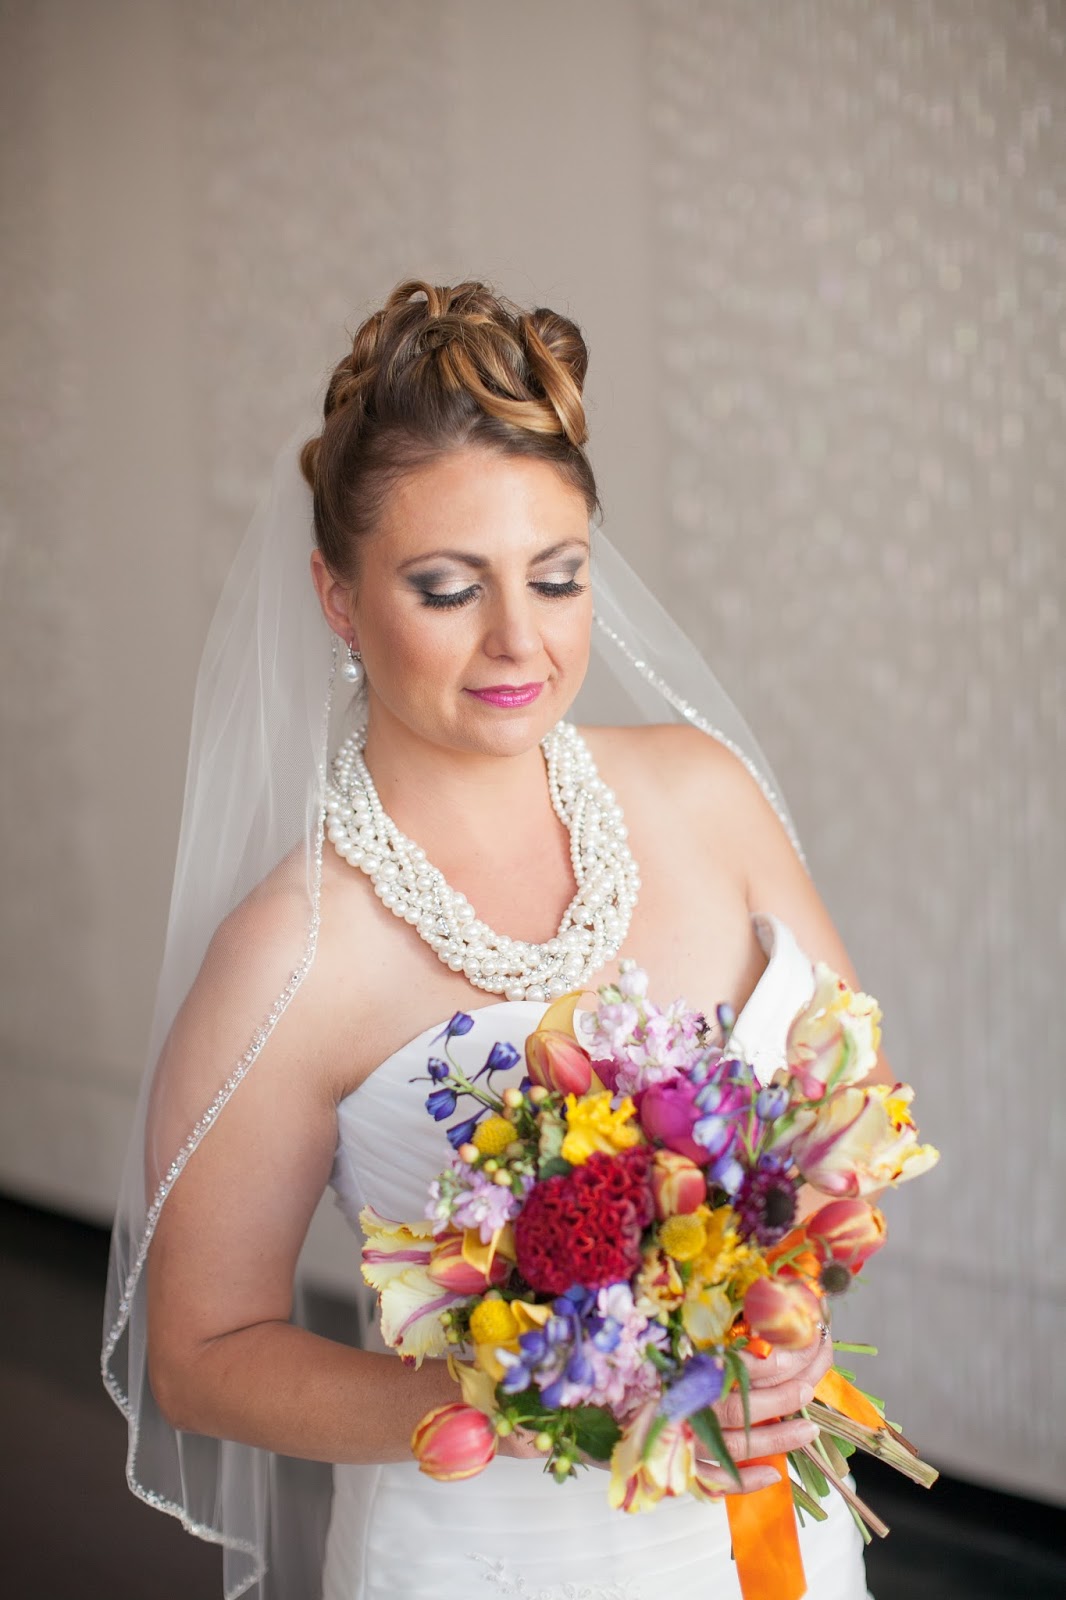 Babydoll Weddings Friendor: Stacey Poterson Photography! | Babydoll ...